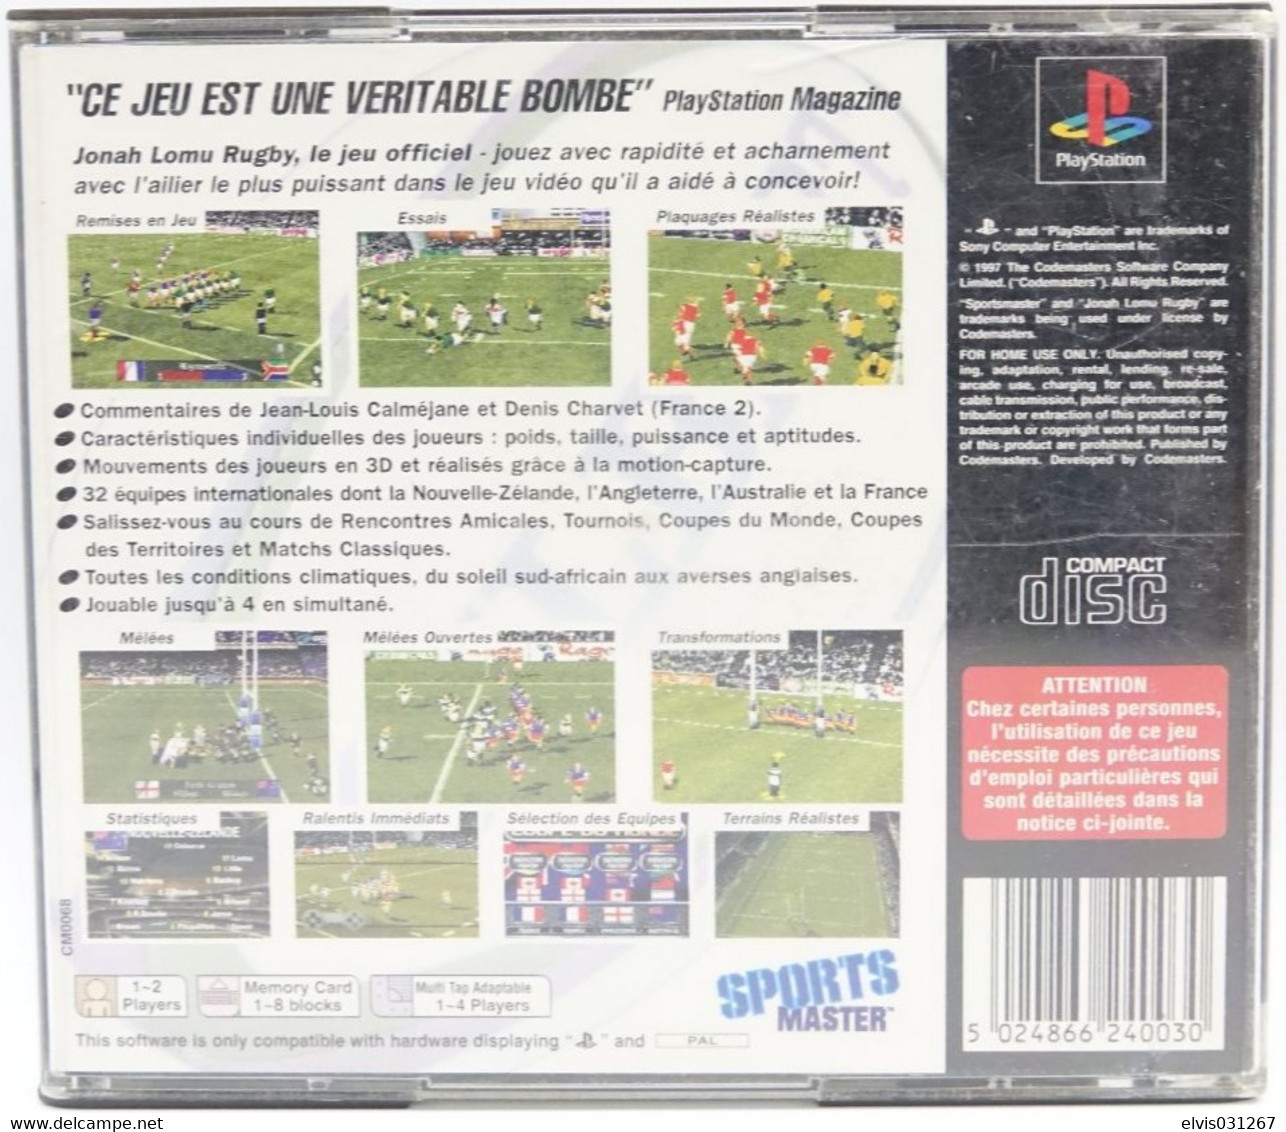 SONY PLAYSTATION ONE PS1 : JONAH LOMU RUGBY - Playstation